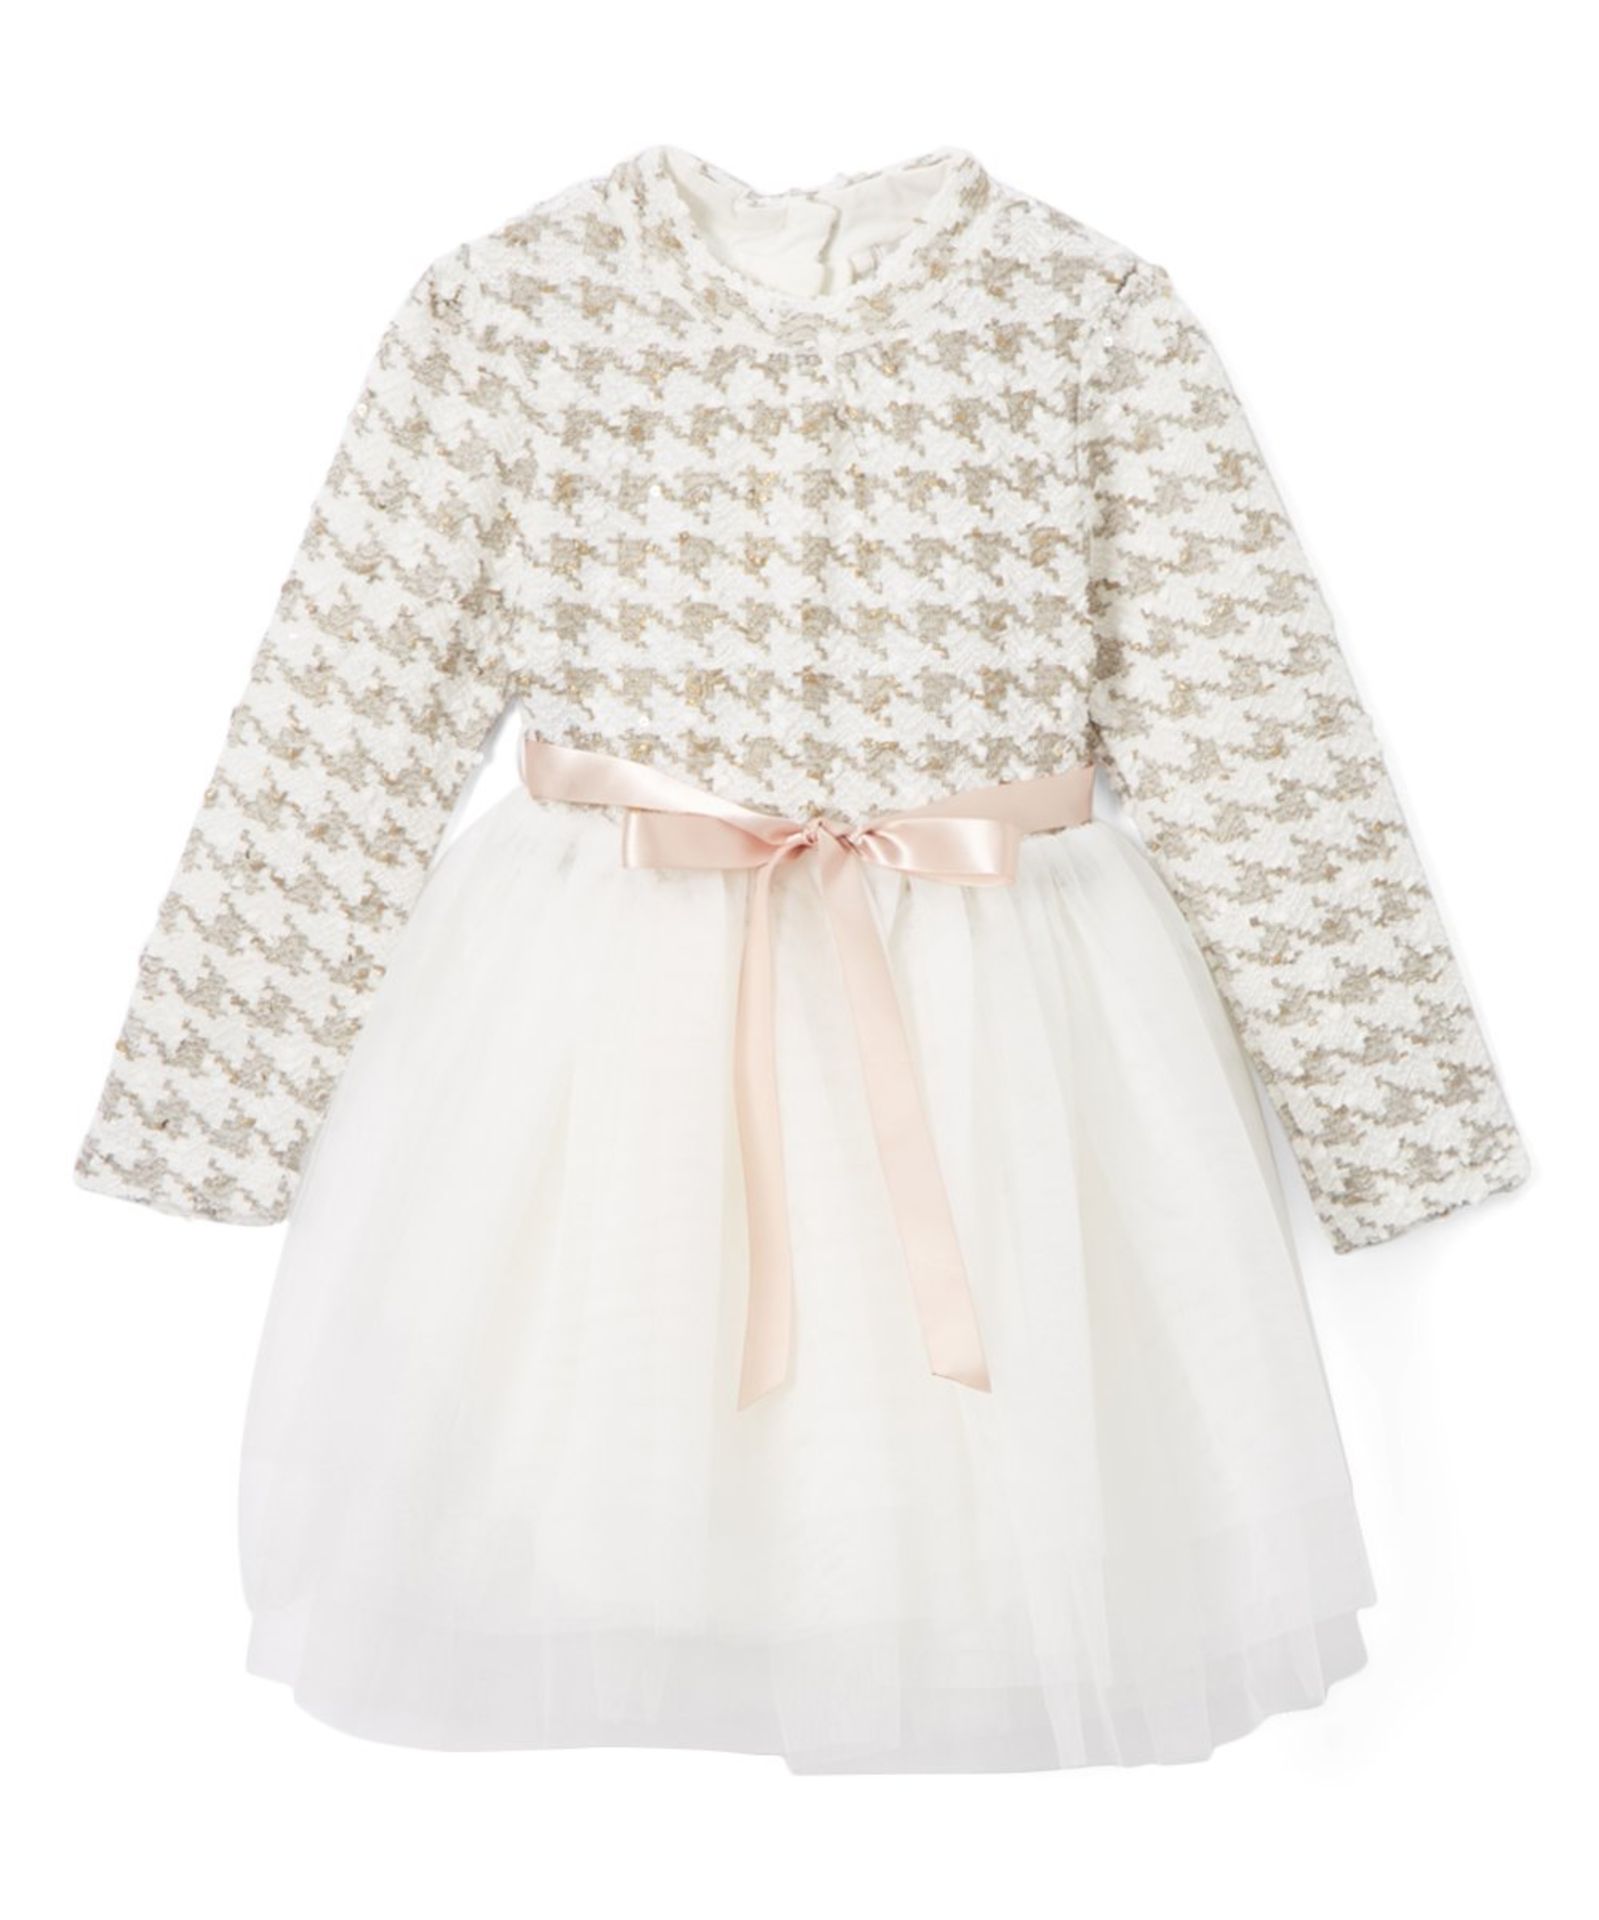 White Houndstooth Charlotte Dress - Toddler - Image 2 of 3